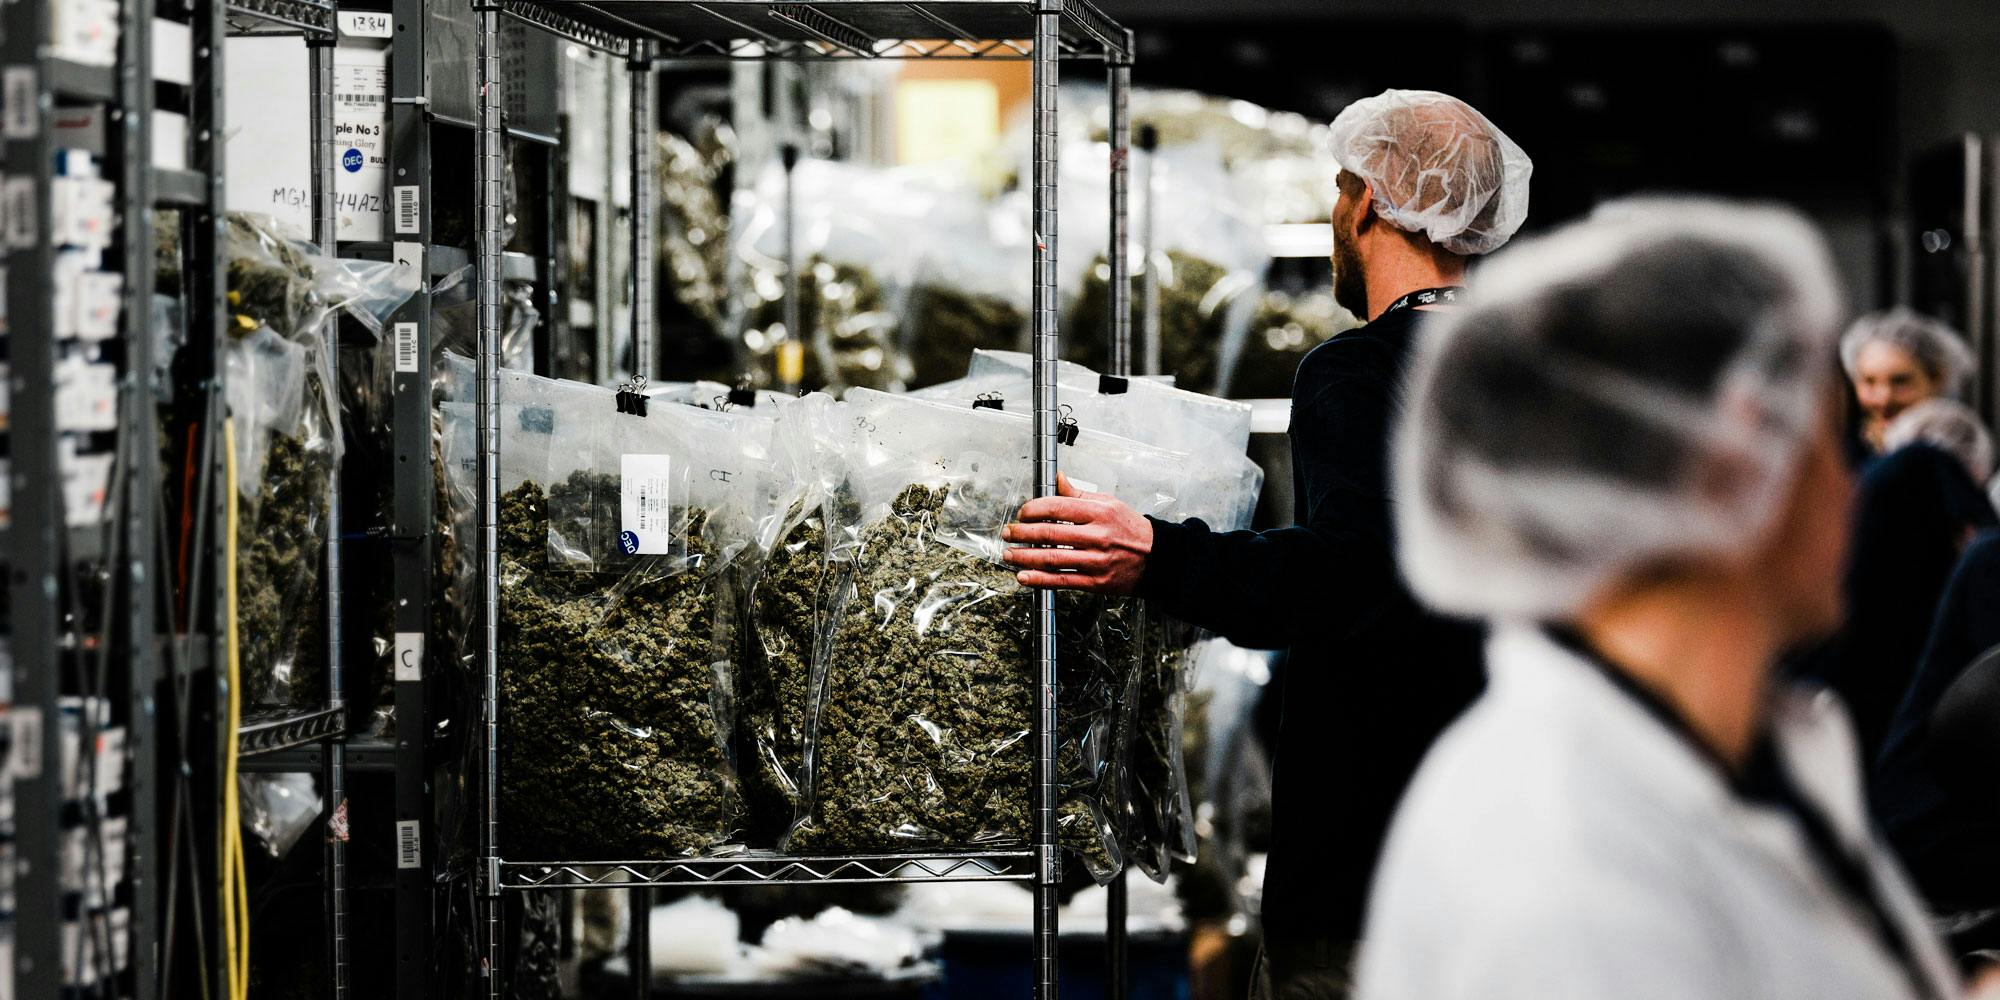 Employees at Tweed, a legal licensed producer in Ontario, ready cannabis for sale. In legal states like Washington, there's stiff competition among growers. This has caused some of them to divert their legal cannabis across state lines